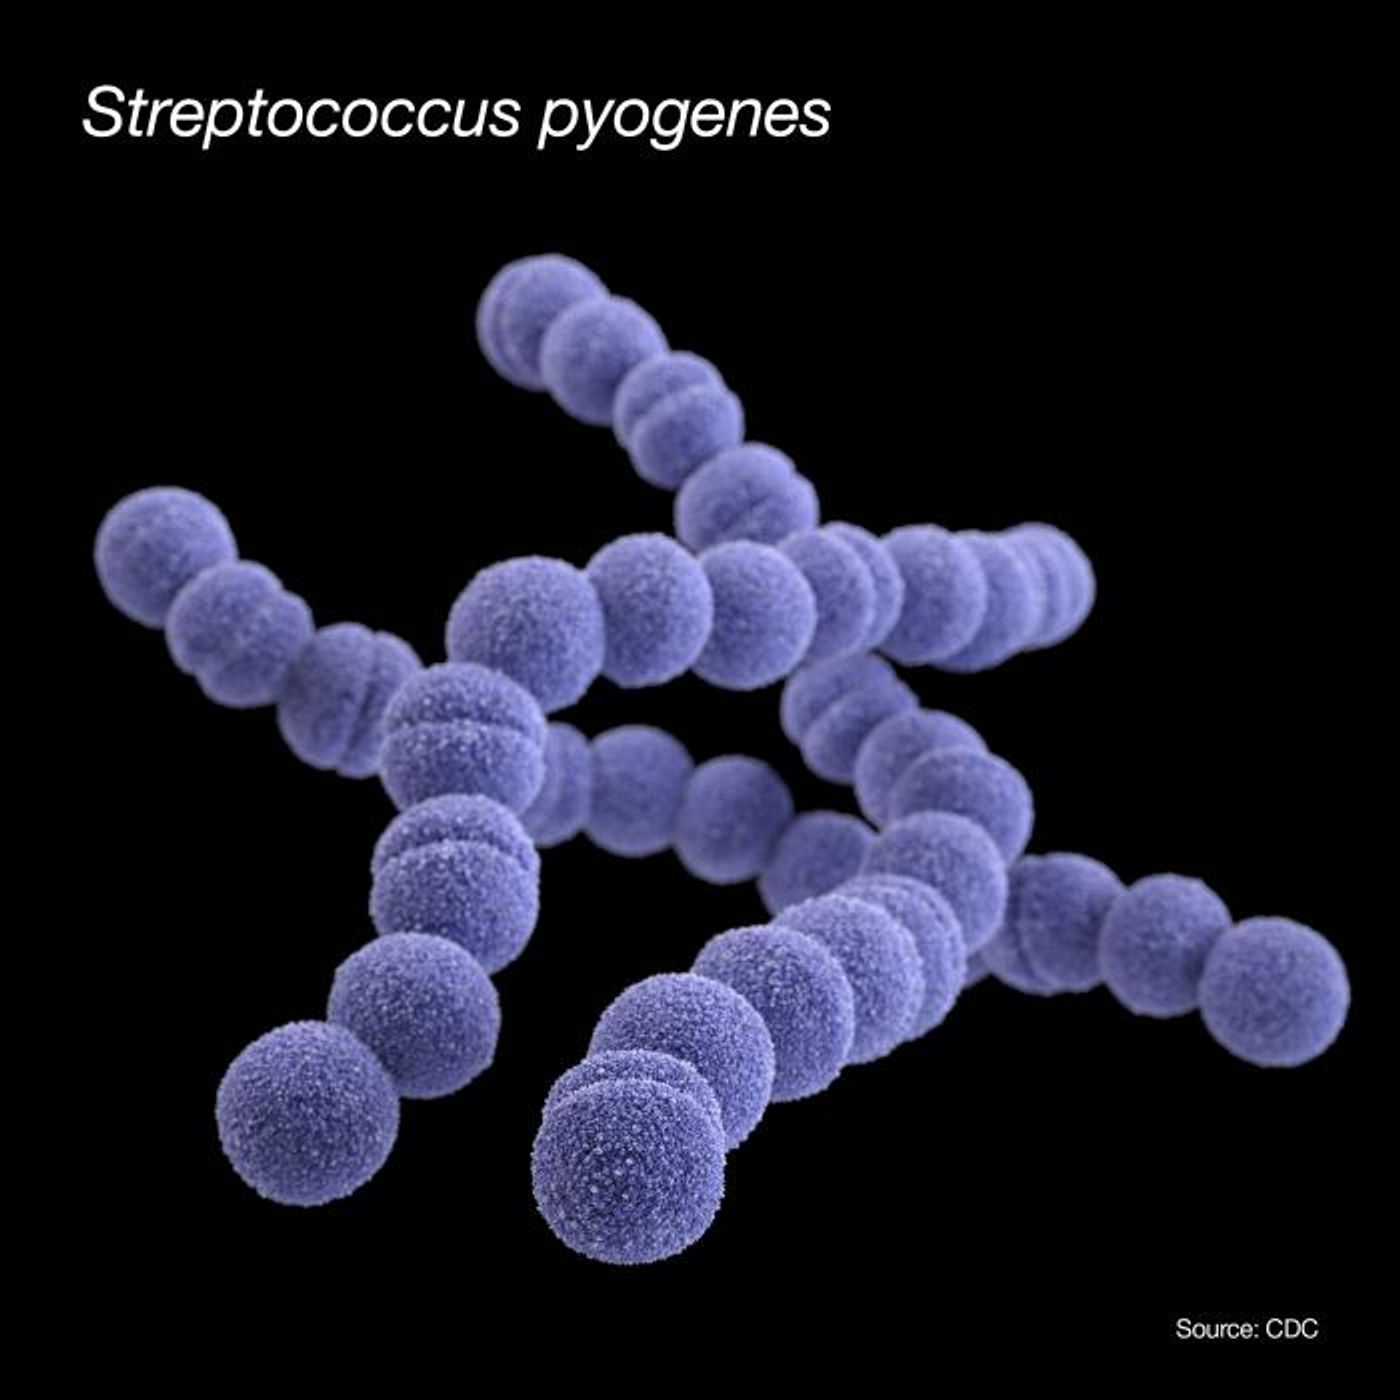  A 3D, computer-generated image of a group of Streptococcus pyogenes (group A Streptococcus) bacteria. The artistic recreation was based on SEM imagery. / Credit: CDC/ Antibiotic Resistance Coordination and Strategy Unit/ Jennifer Oosthuizen - Medical Illustrator